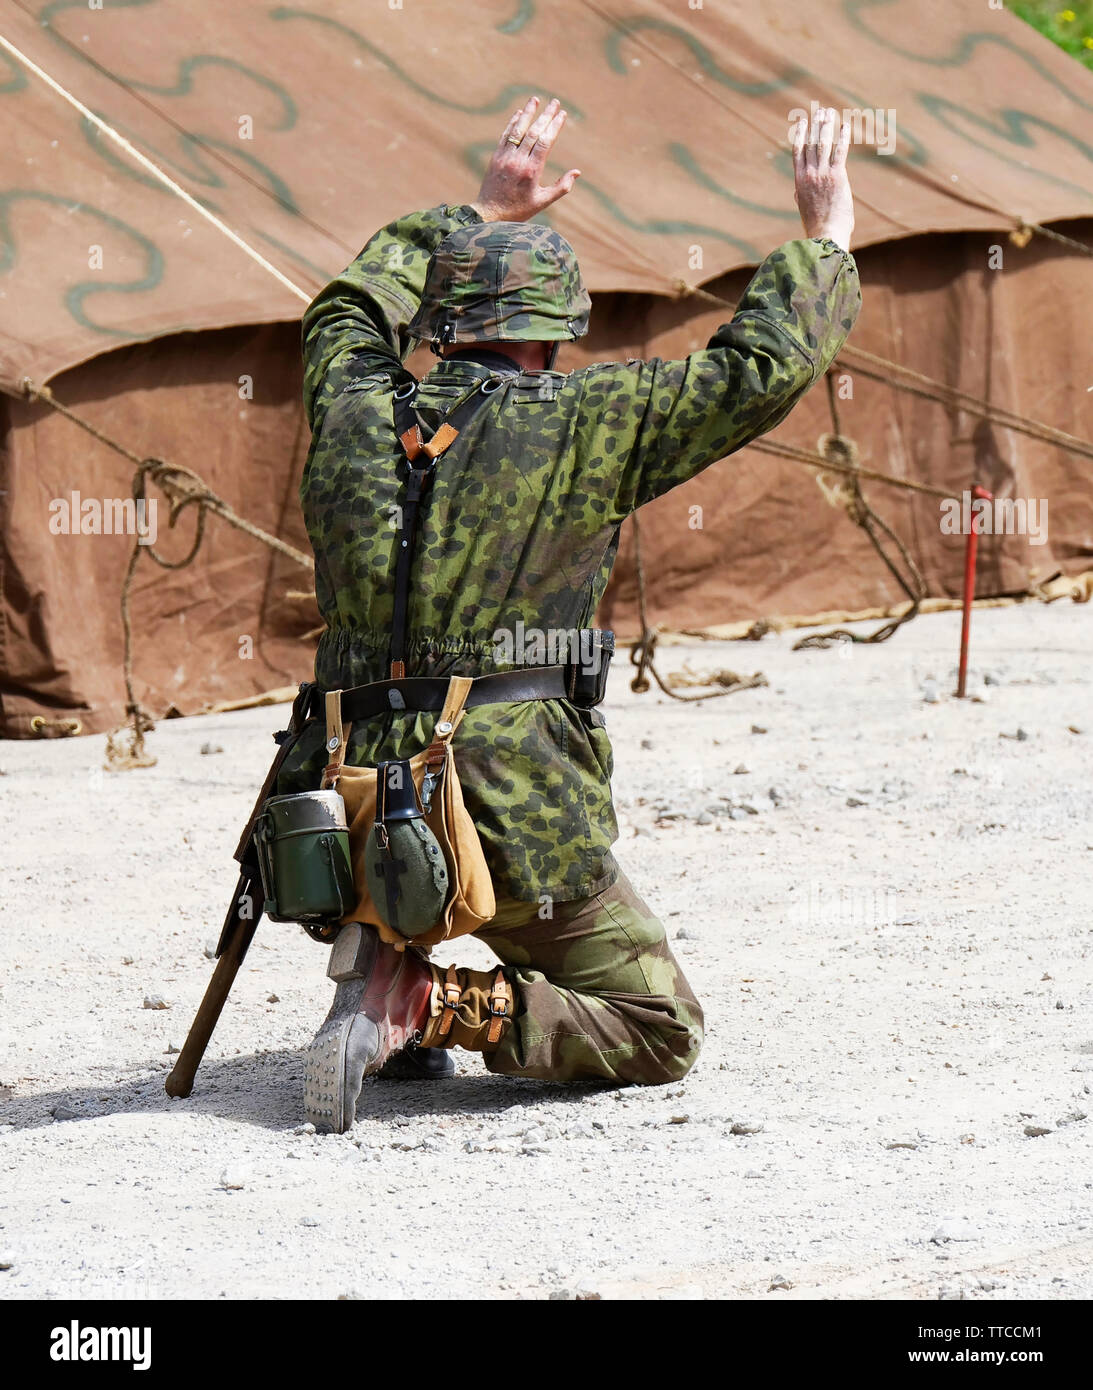 A reenactor dressed as a German World War Two Waffen SS Soldier surrendering Stock Photo